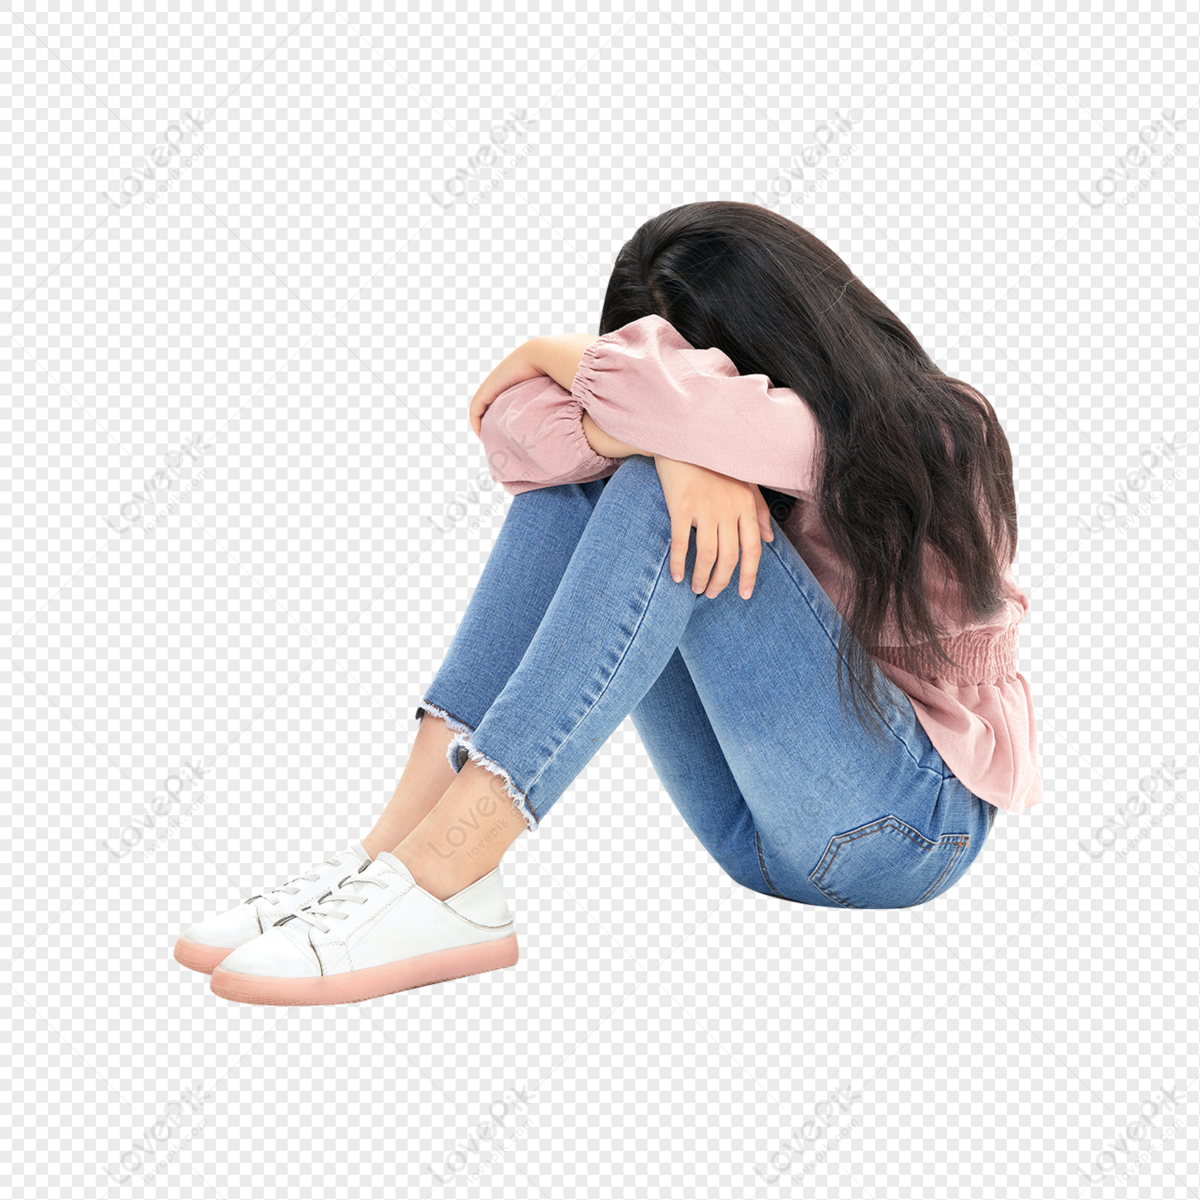 Sad Girl Sitting On The Ground PNG Image And Clipart Image For ...